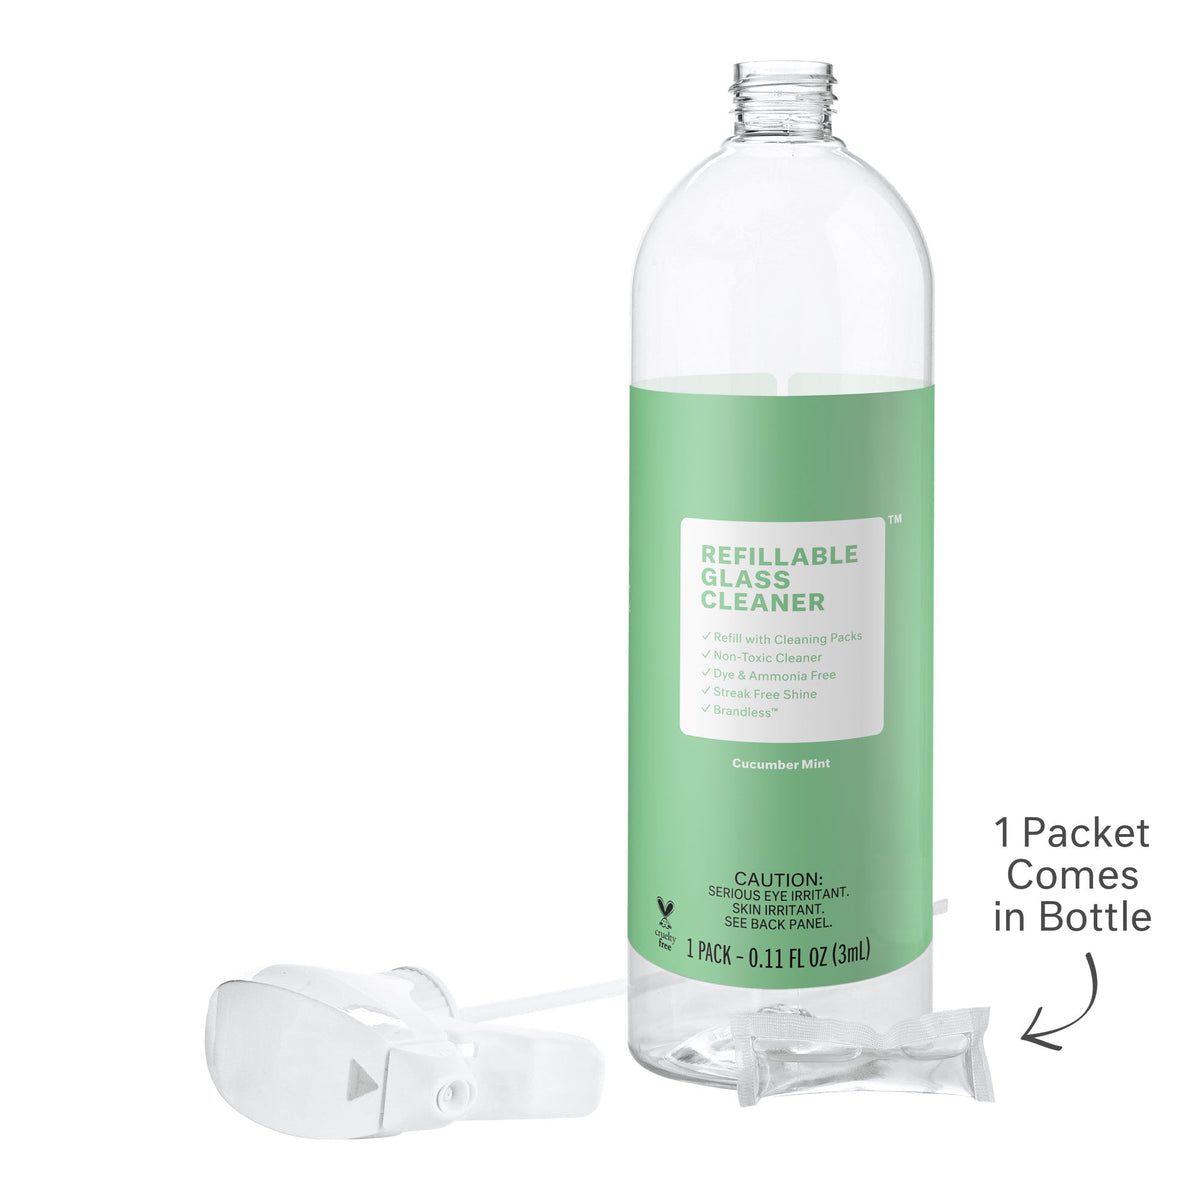 Cucumber mint spray bottle front view with visual of refill packet